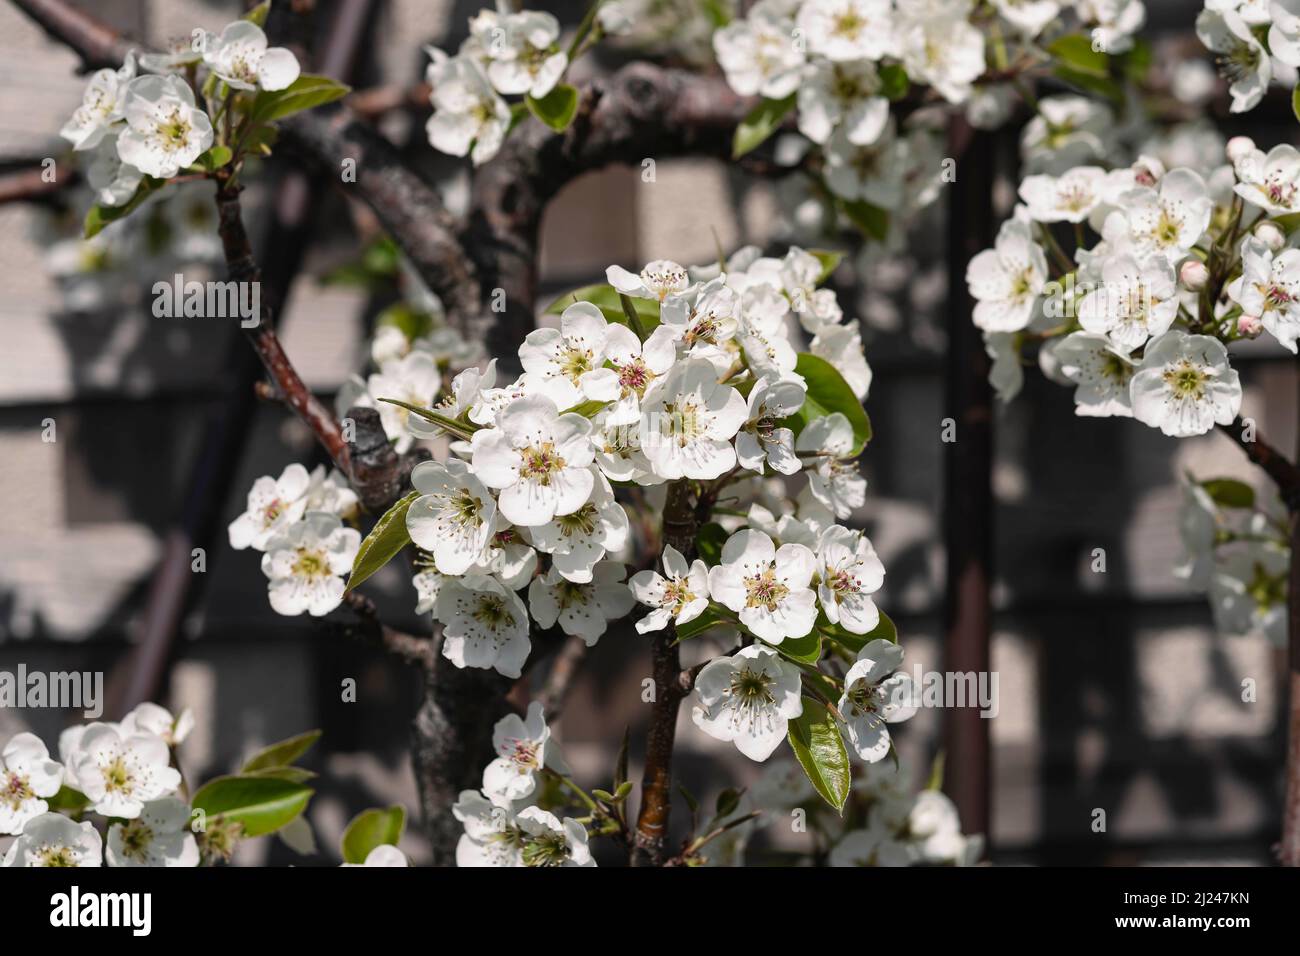 Tiny white flowers bloom in early spring. Stock Photo